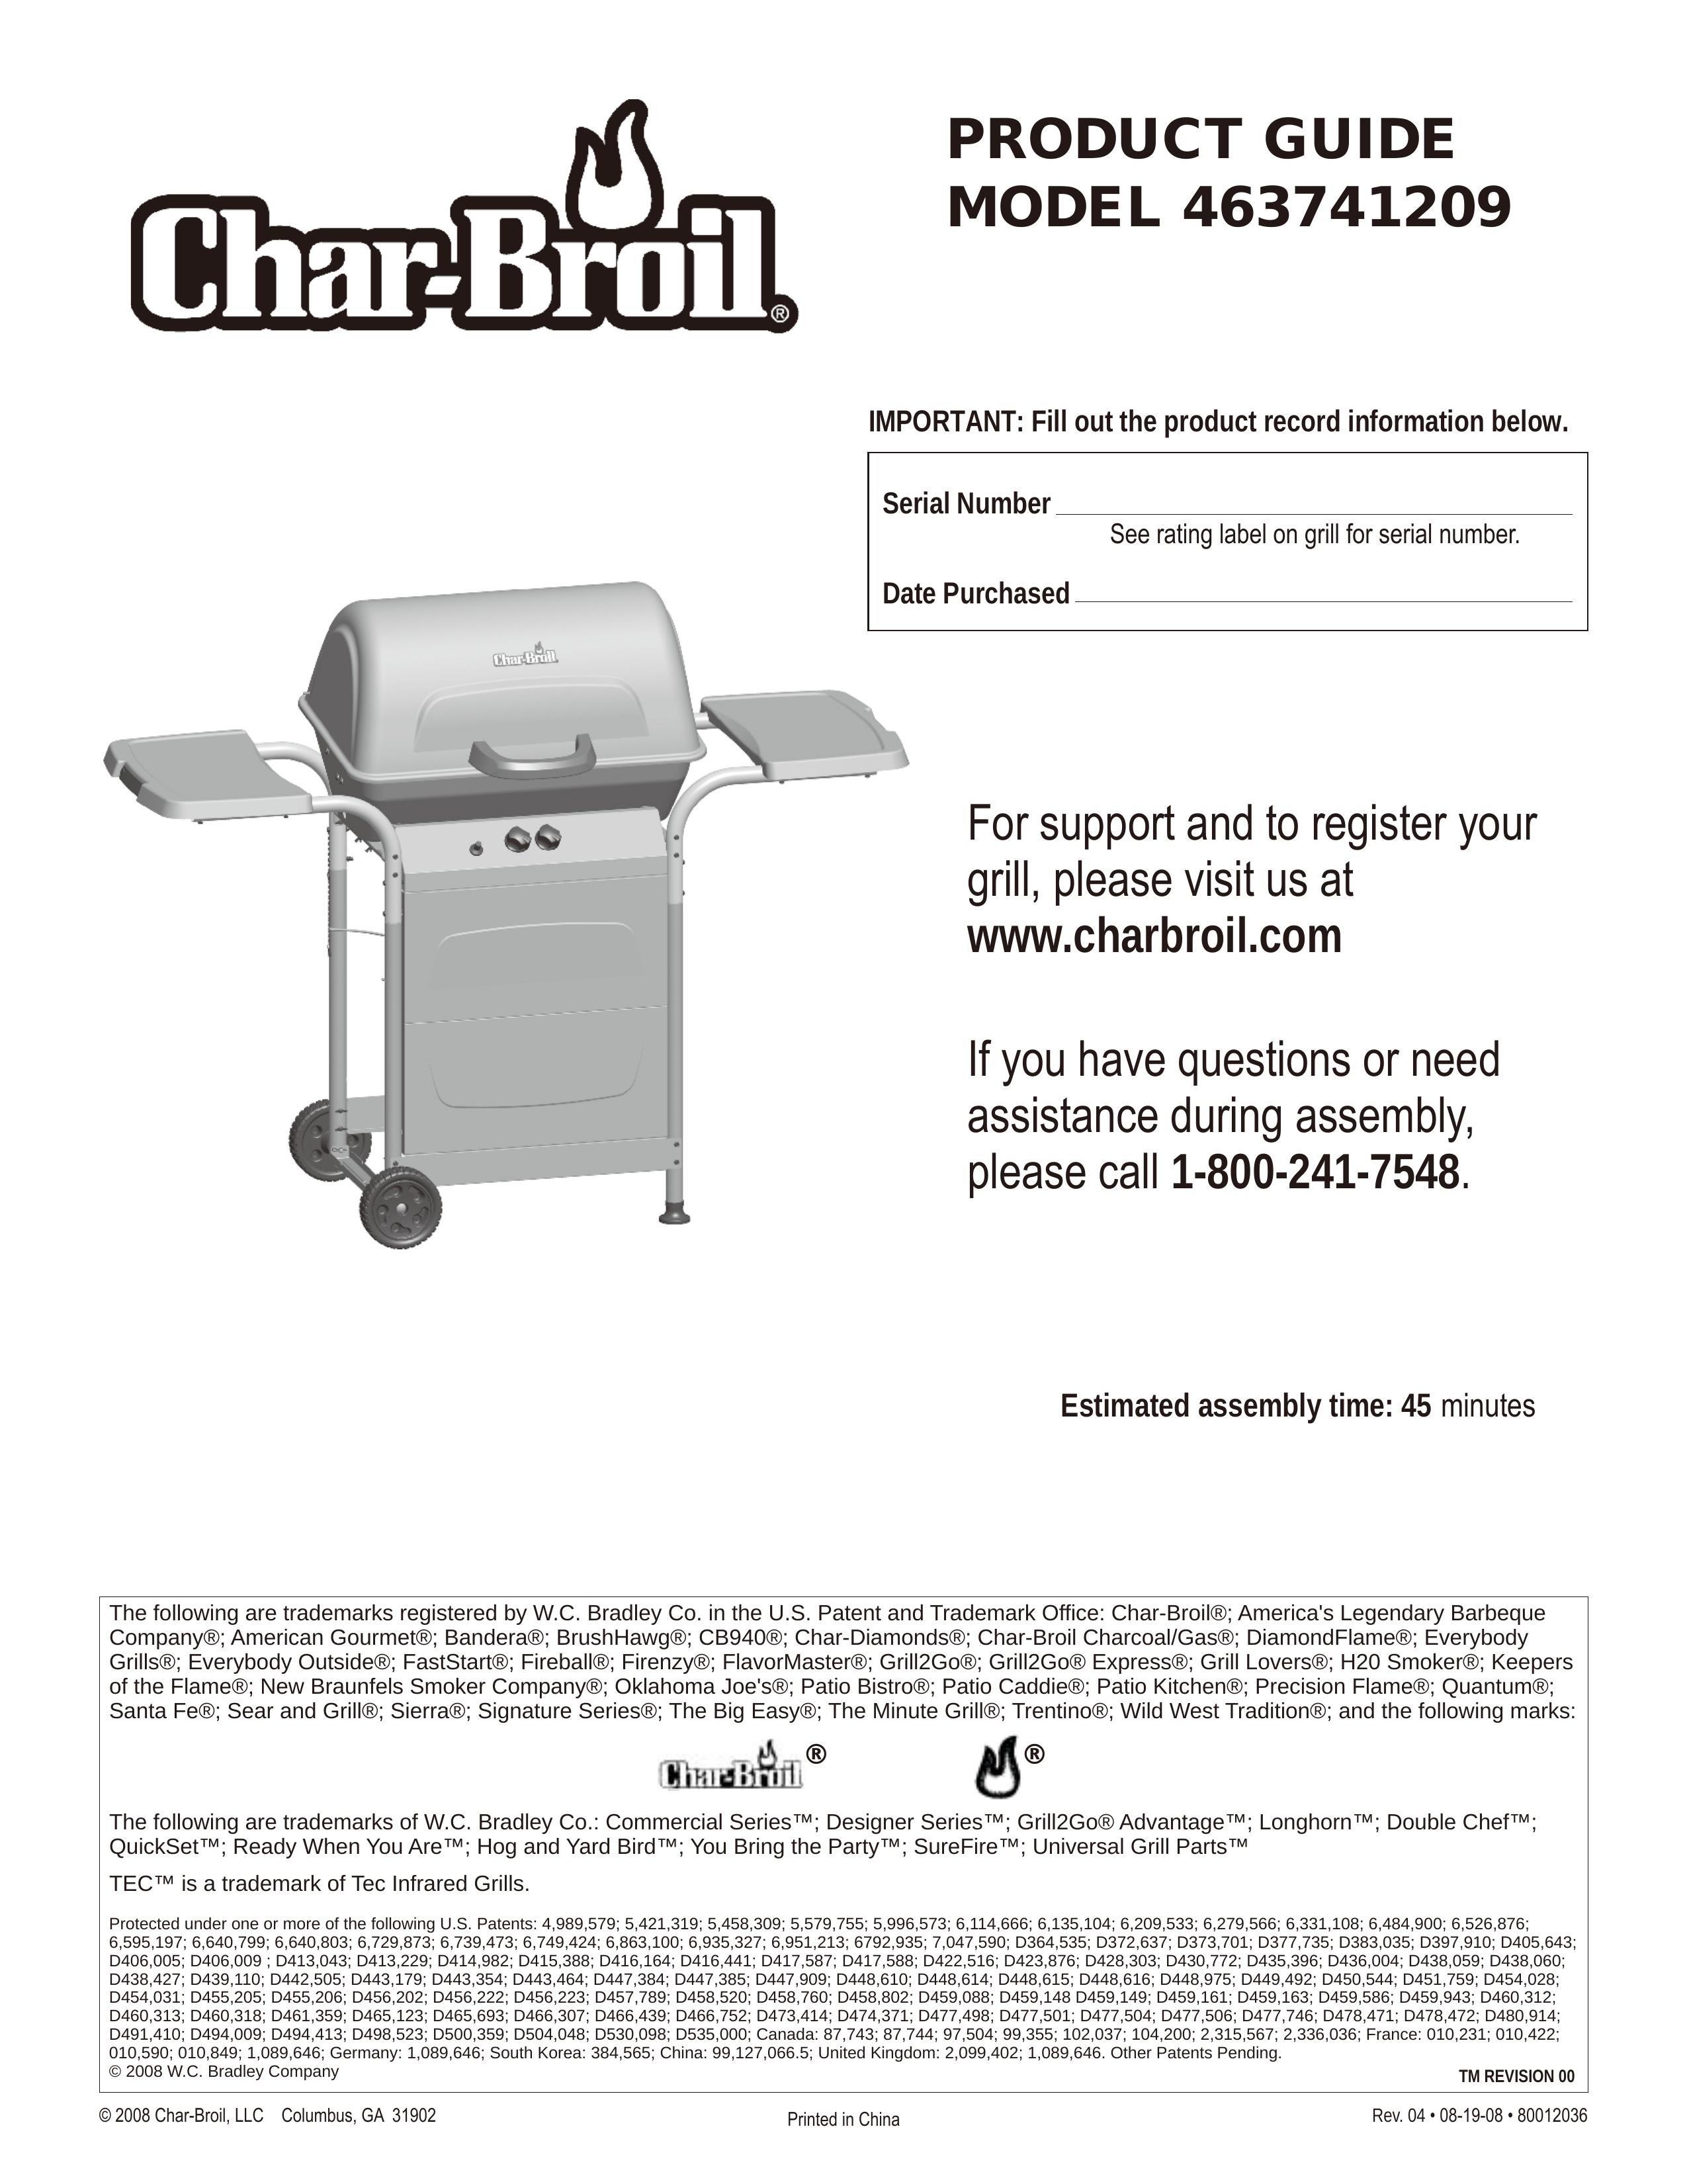 Char-Broil 463741209 Electric Grill User Manual